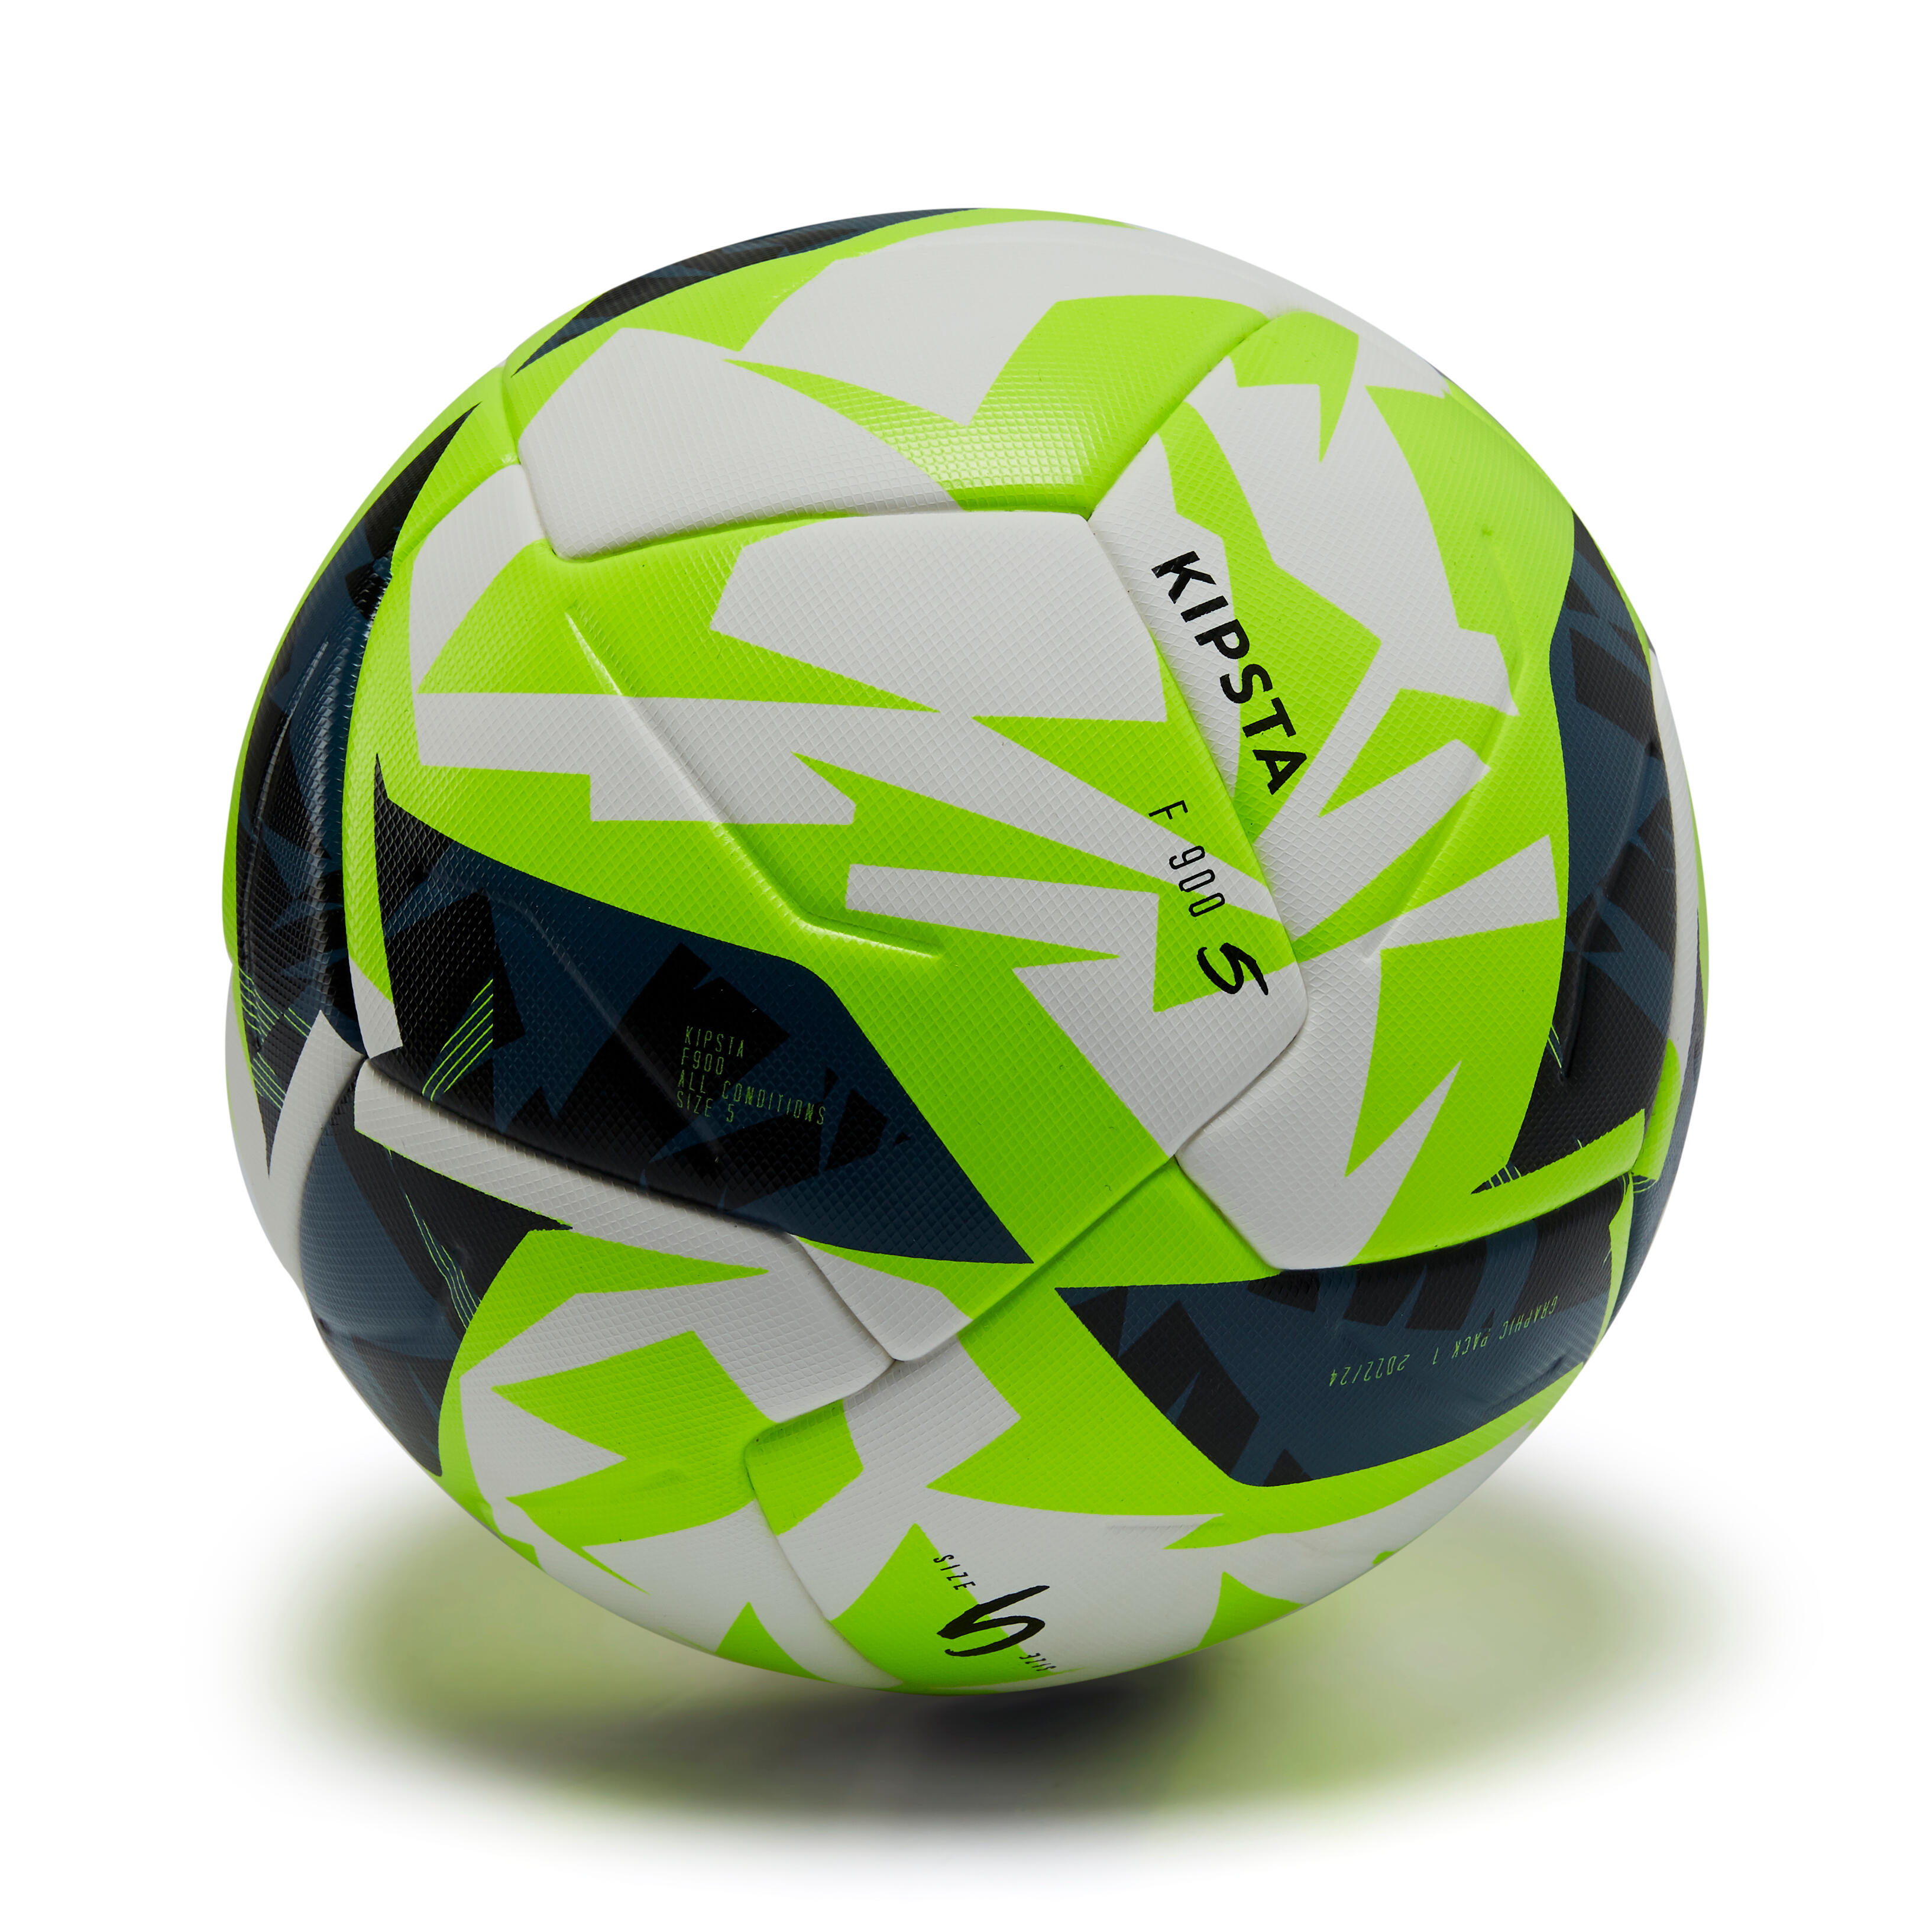 Size 5 FIFA Thermobonded Soccer Ball - F 900 - Snow white, Snow white ...